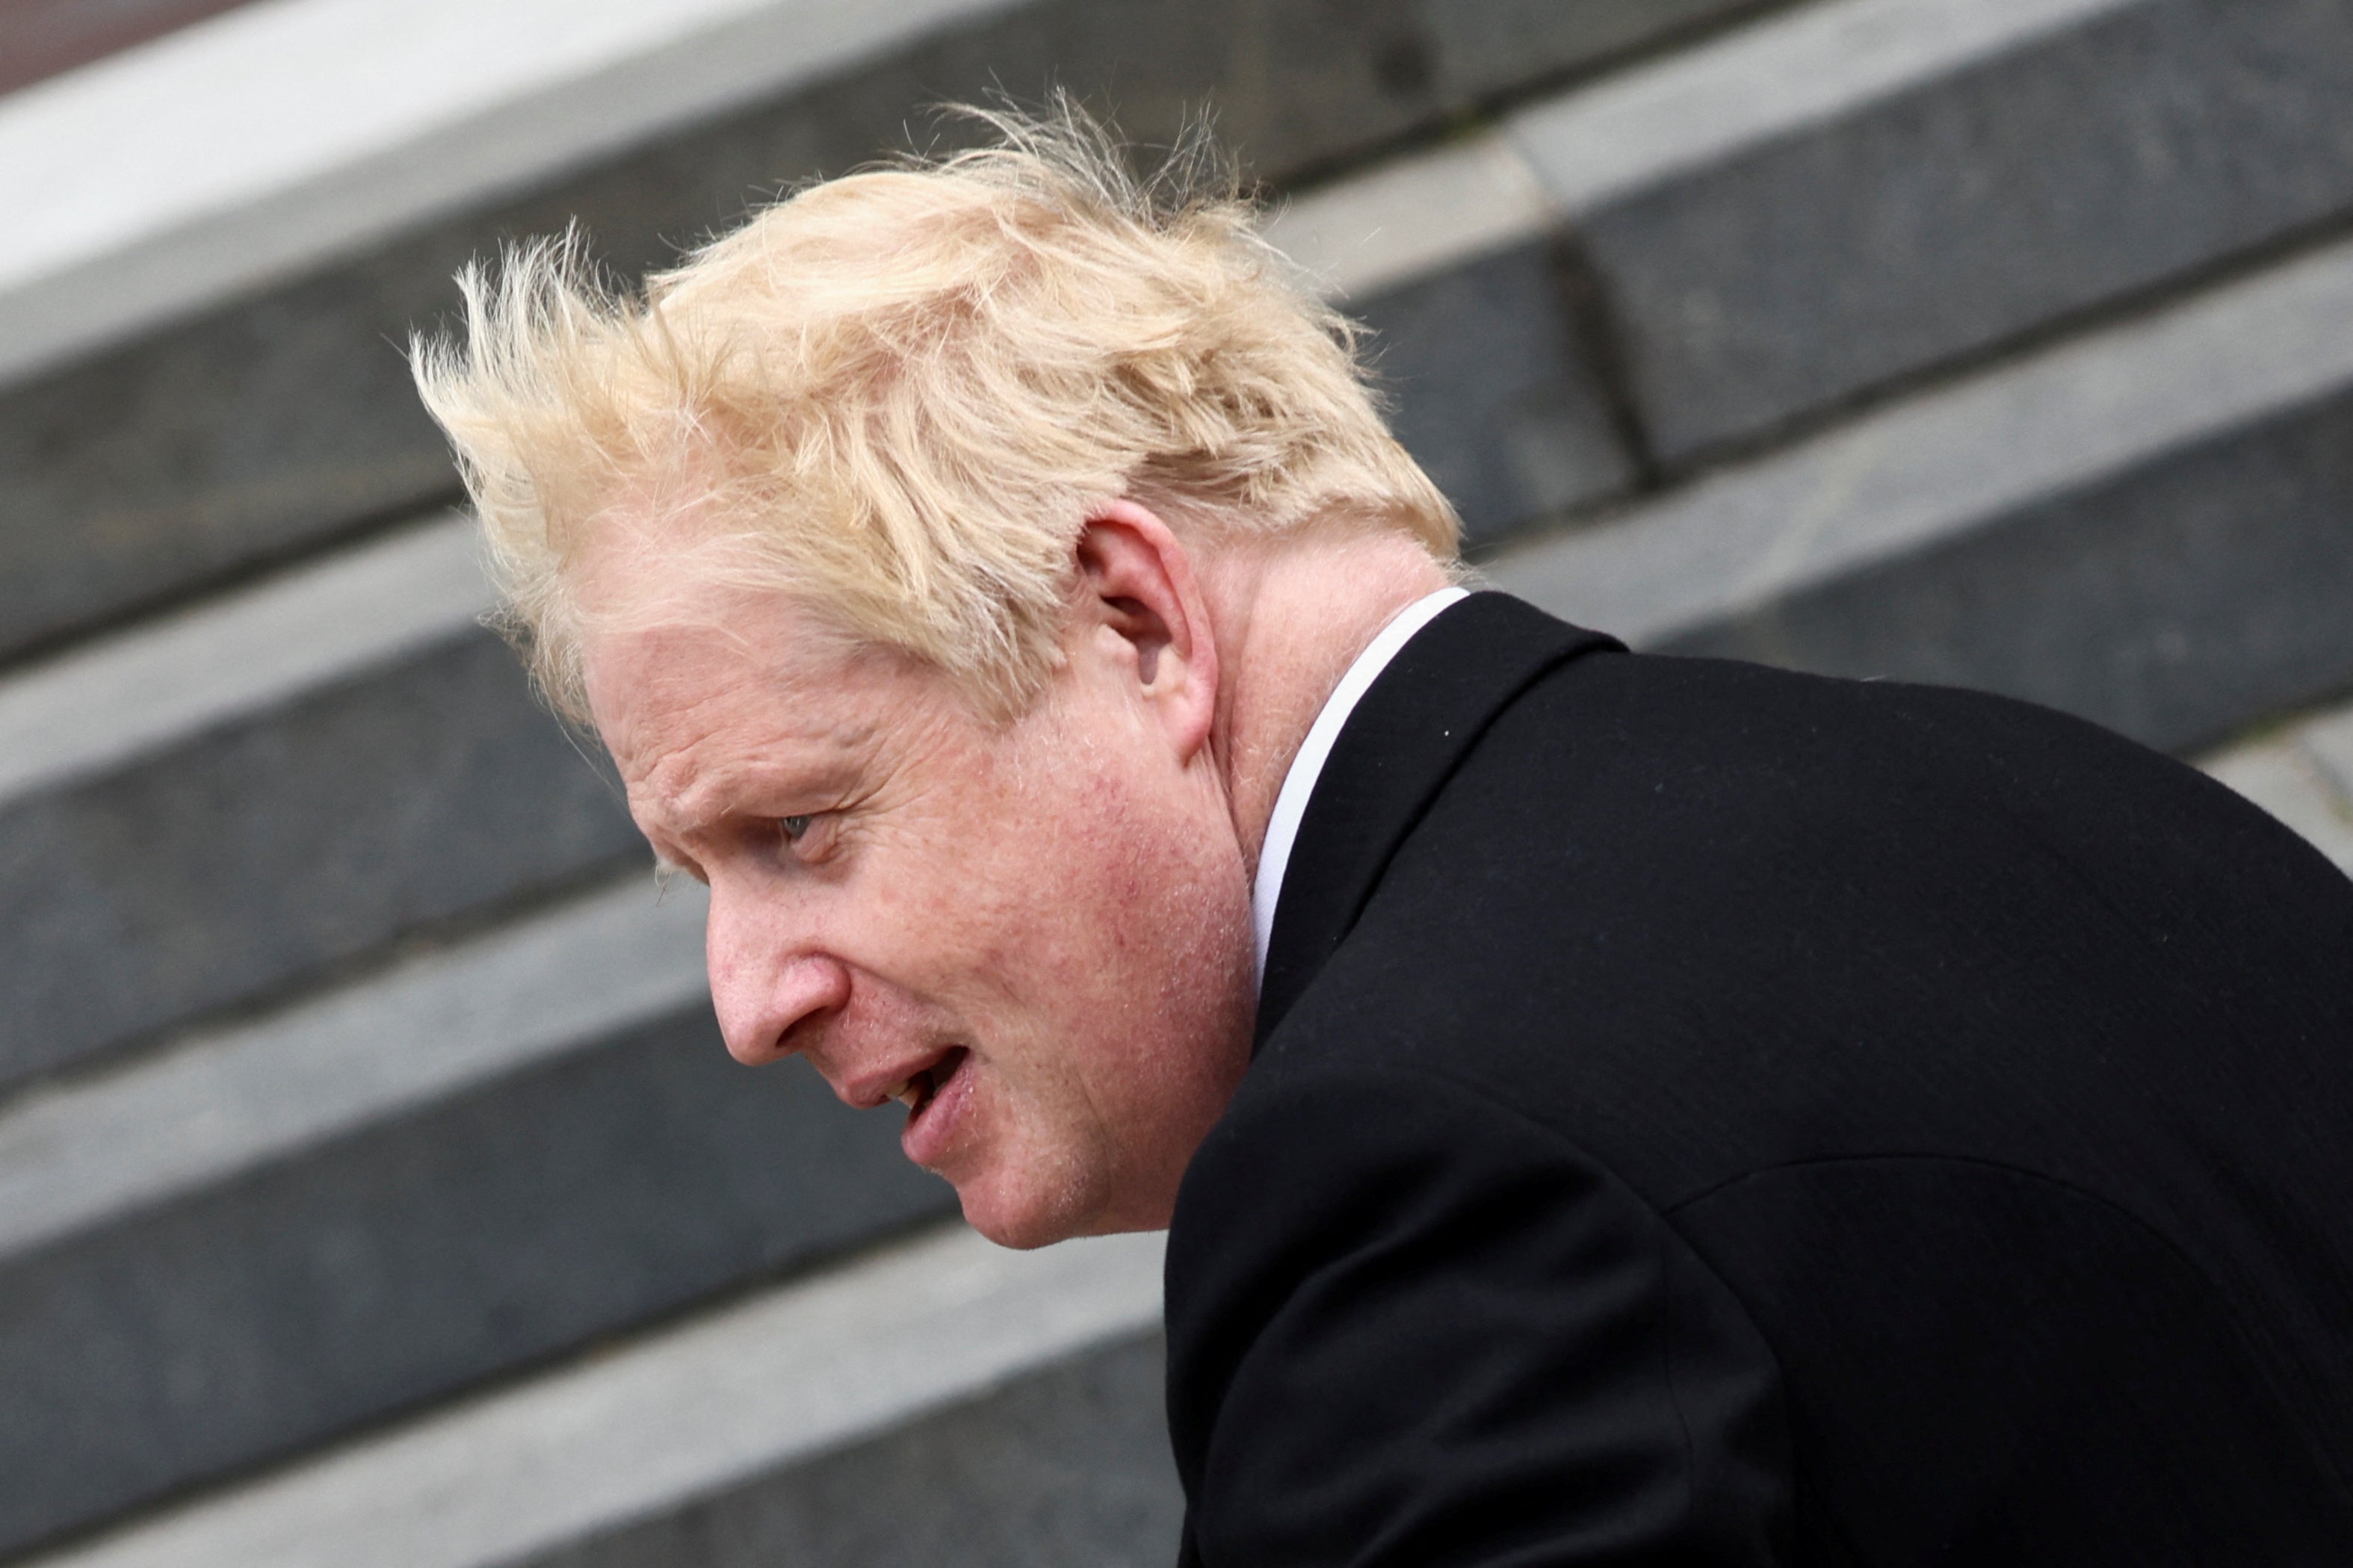 Boris Johnson is to face a confidence vote after a dozens of Conservative MPs withdrew support for his leadership (Henry Nicholls/PA)